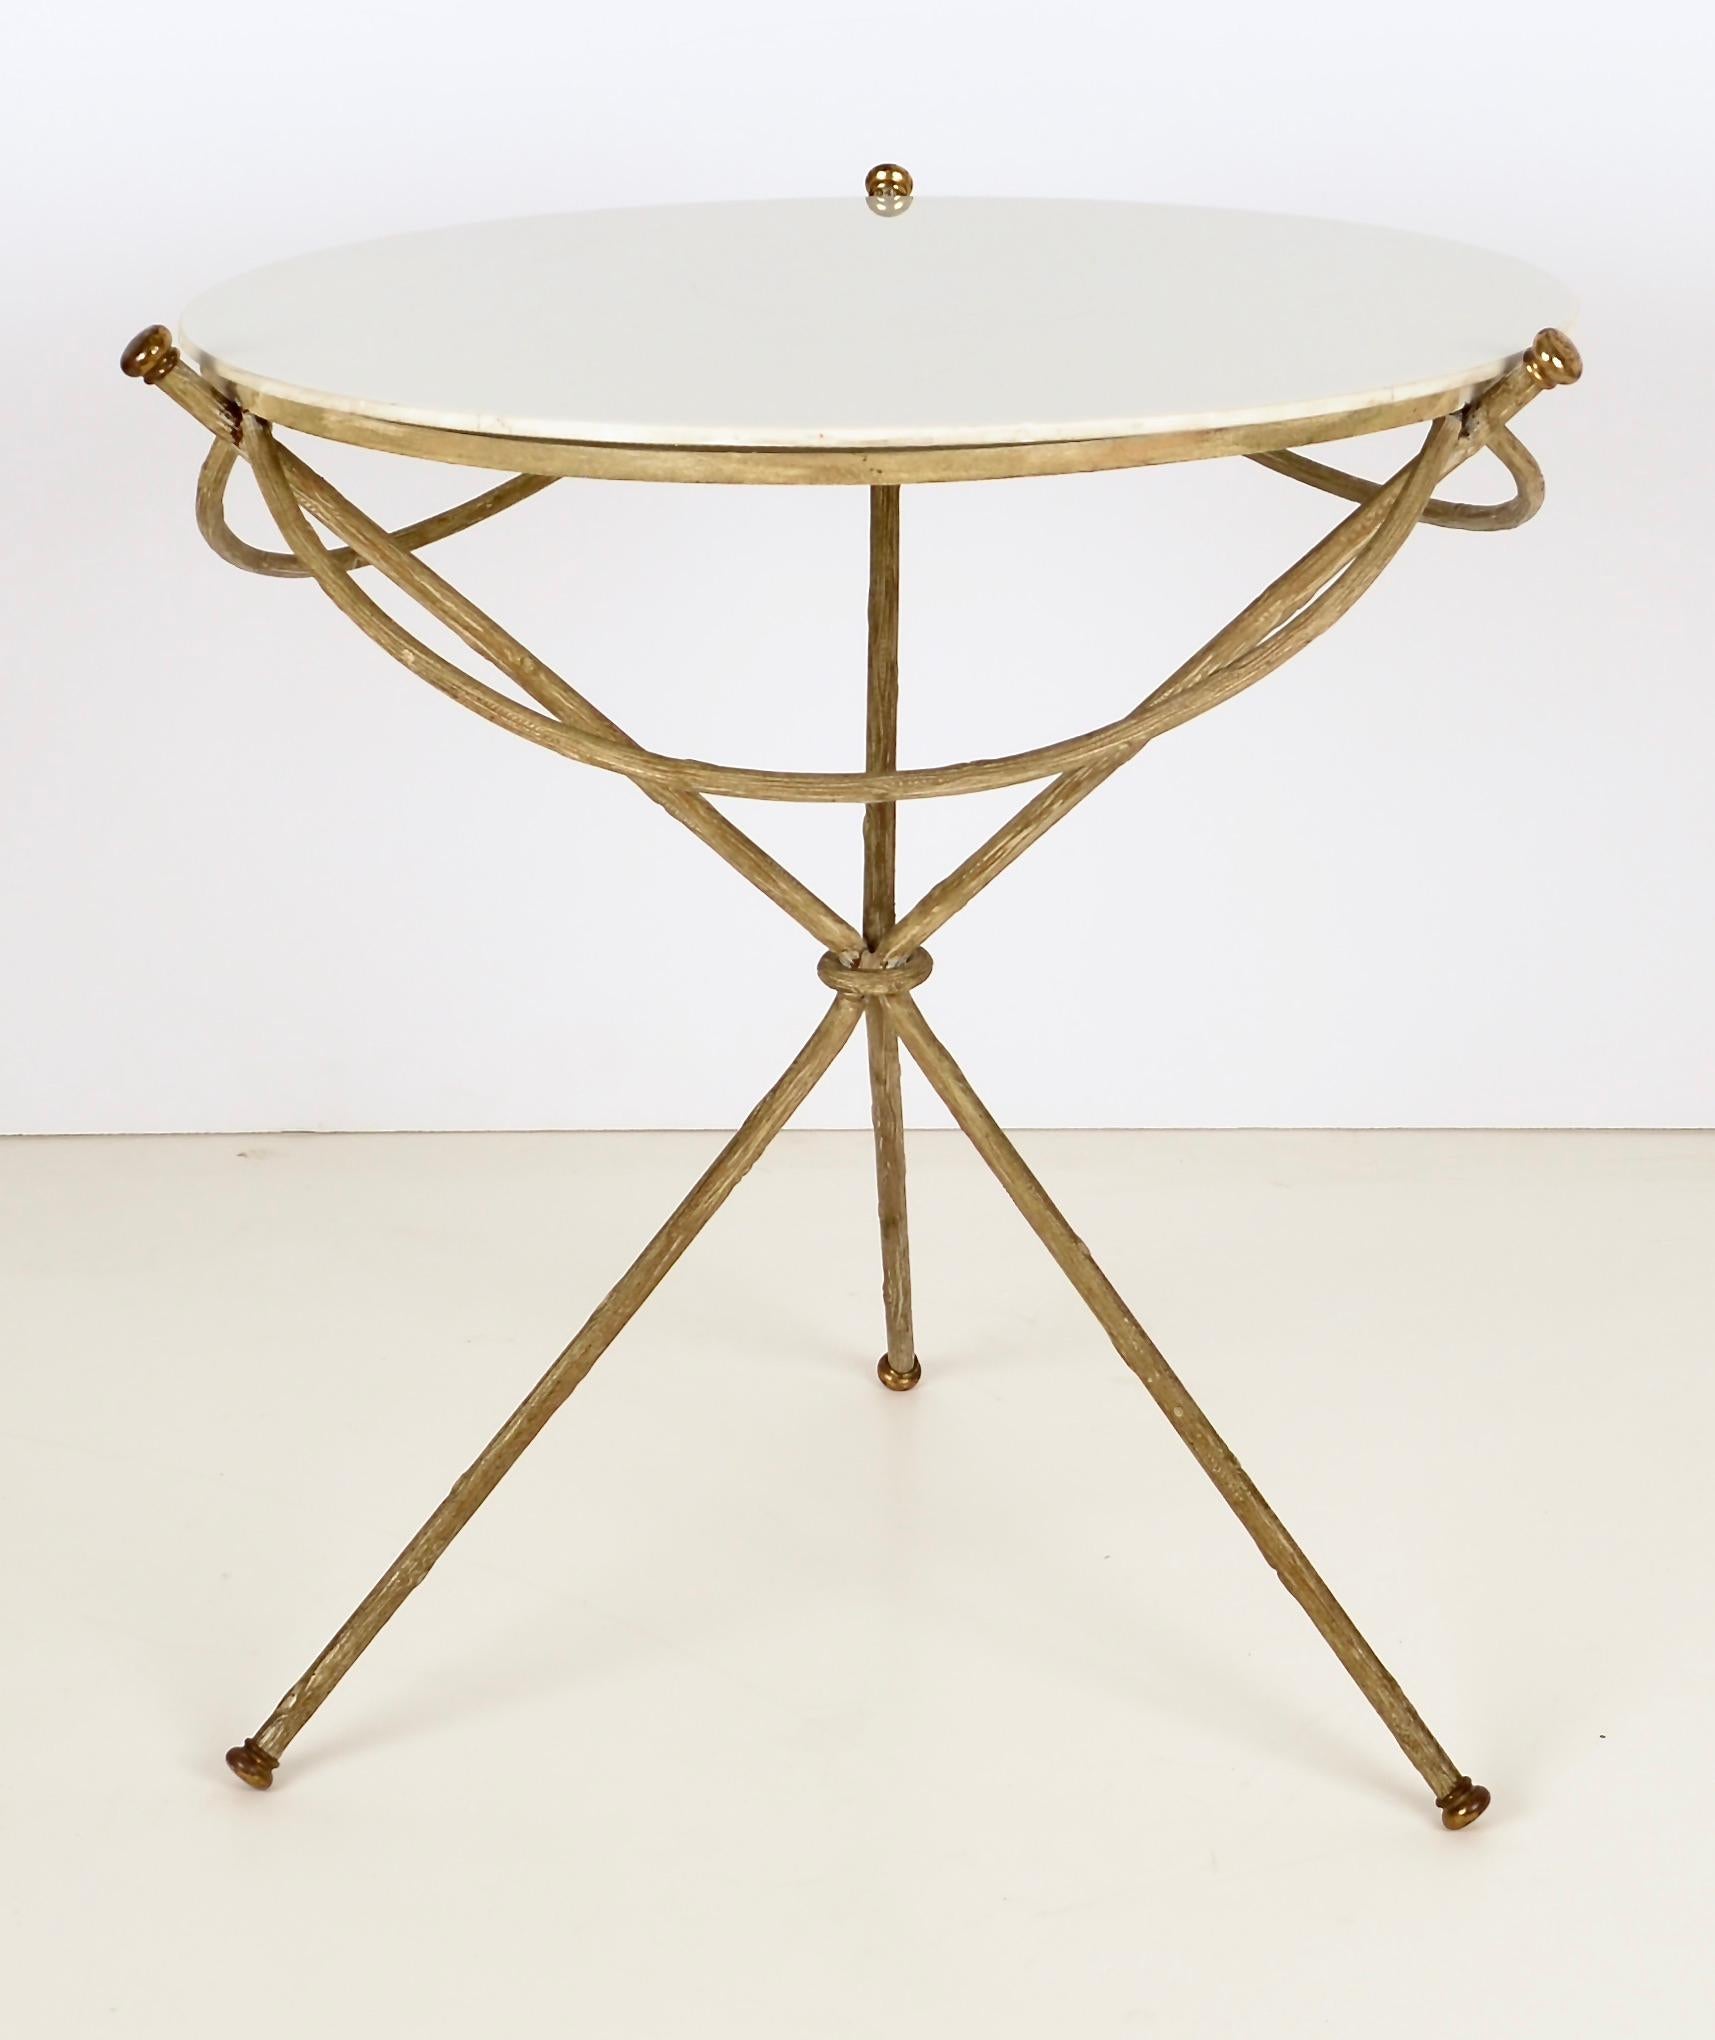 Unusual, lyrical side table with sculptural metal base featuring a subtle faux bois pattern. Brass details. French milk glass top still in fine condition, no chips or scratches.